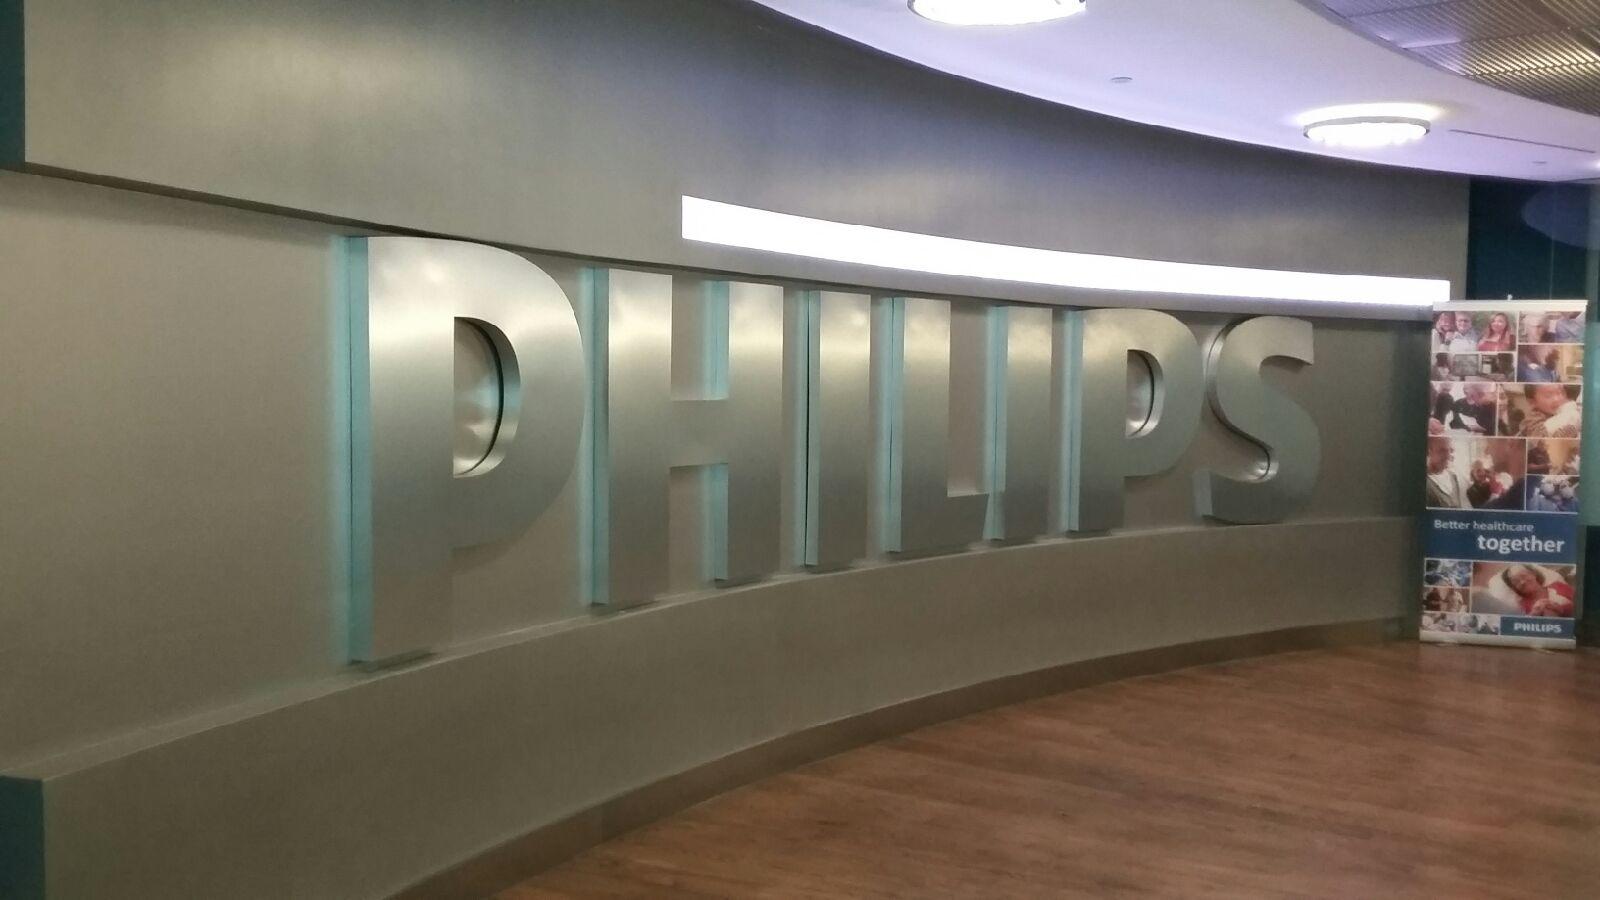 After Philips Lobby Sign